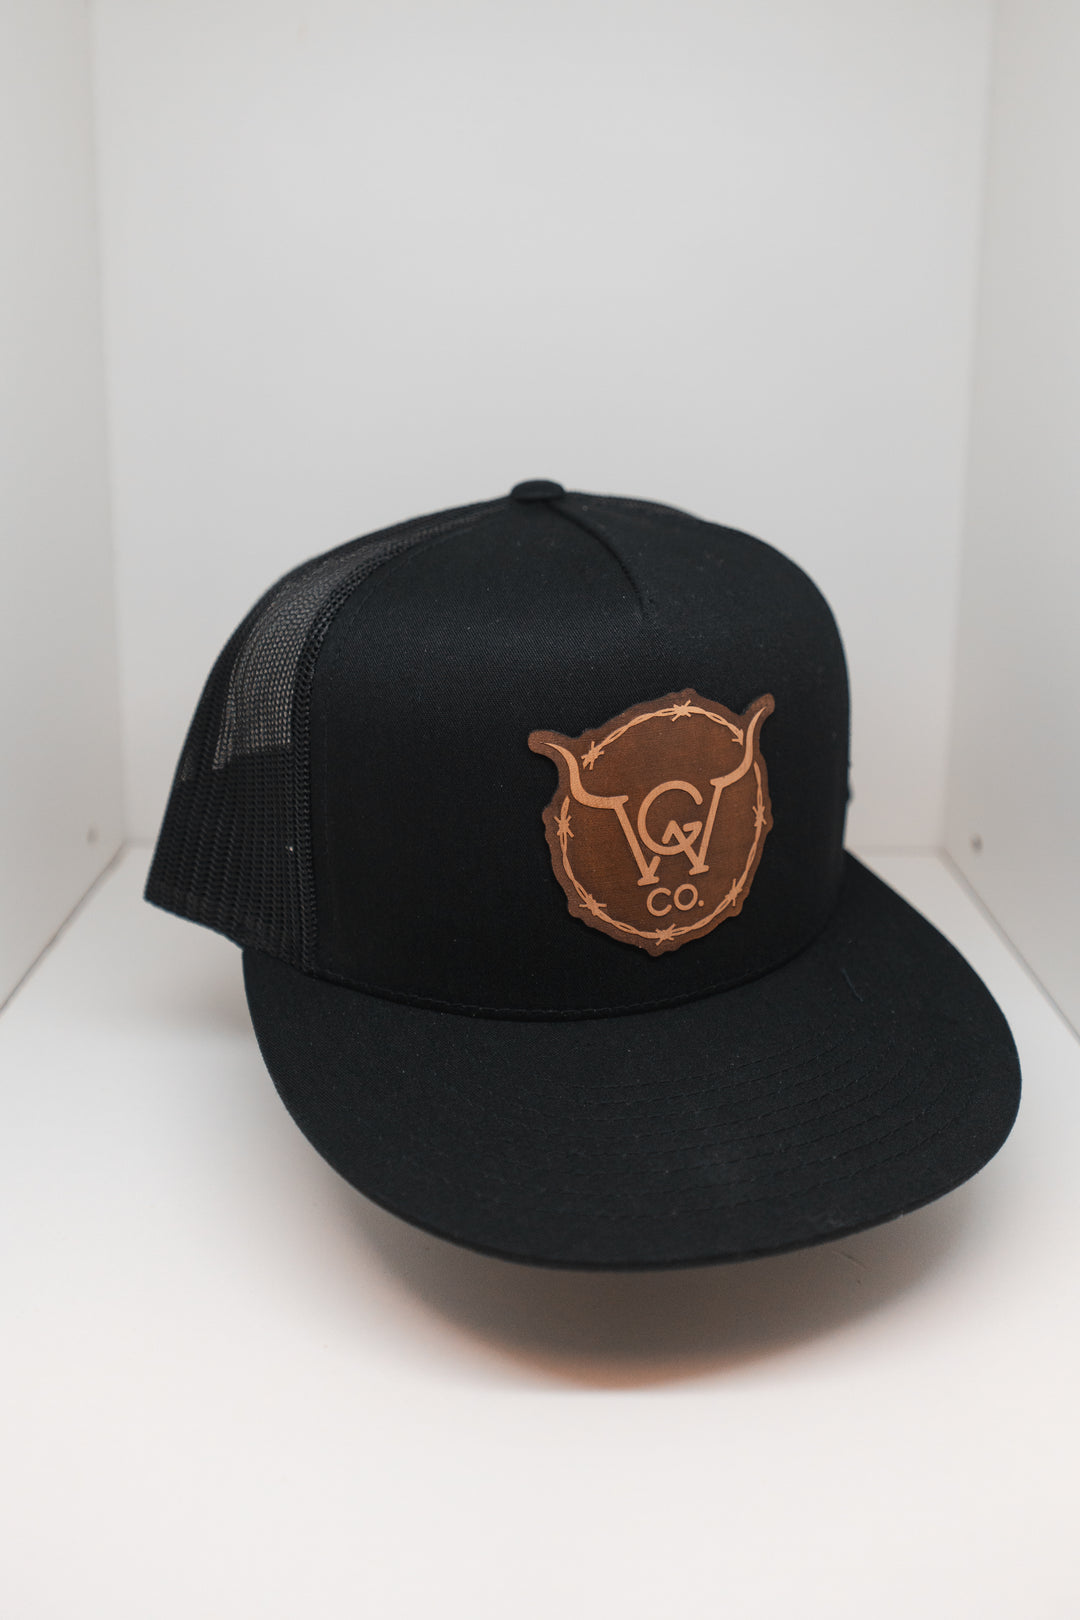 WGC Reverse Leather Patch - Black Hat